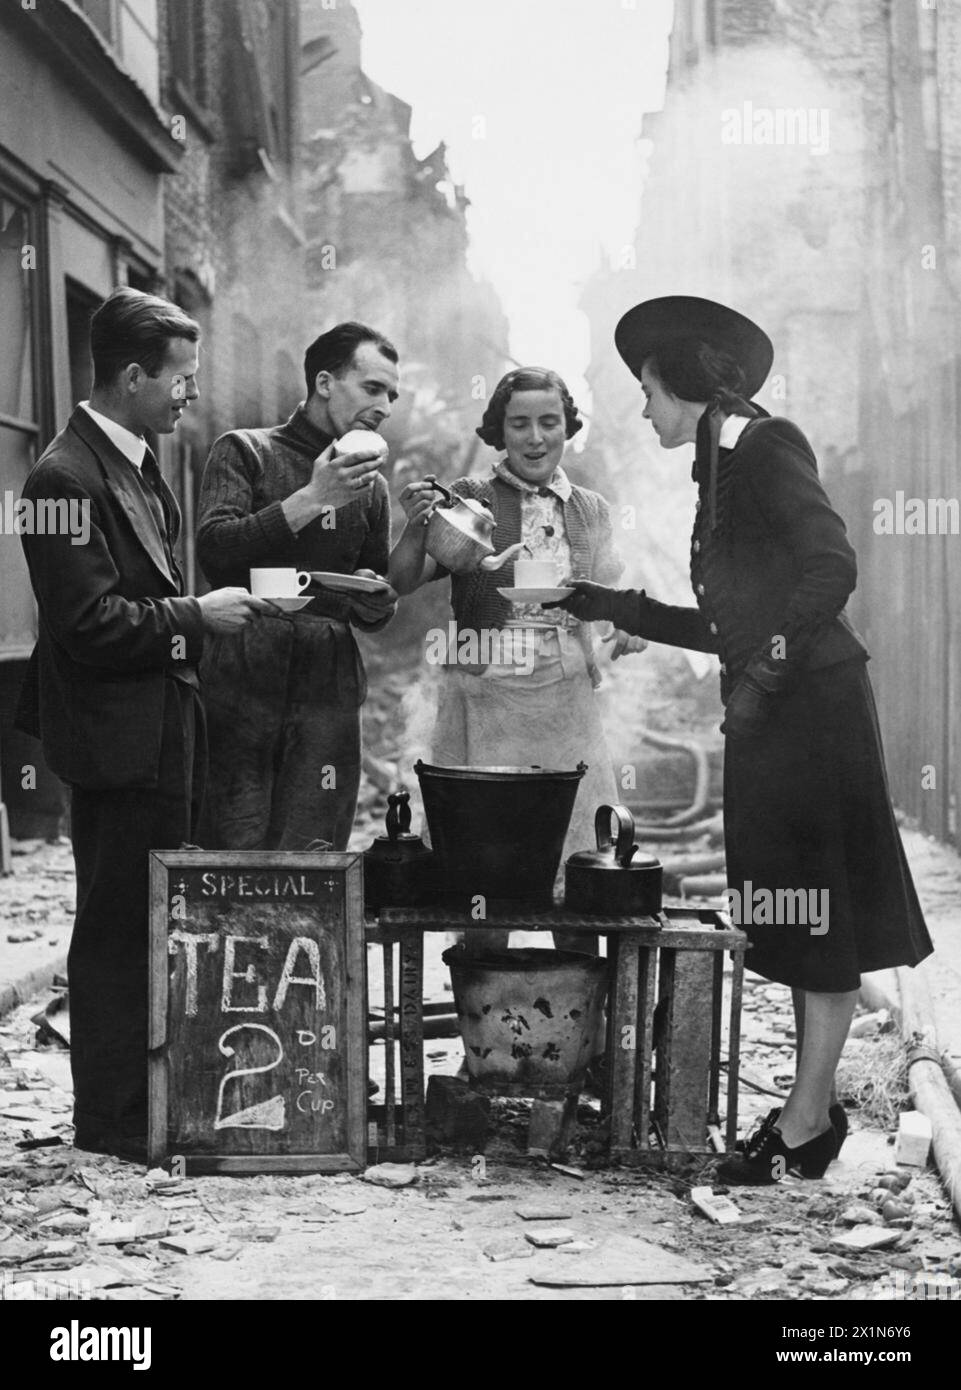 LONDON BLITZ 1940 - 1941 - Morning after a night raid a cafe proprietor in a side street carries on, Stock Photo